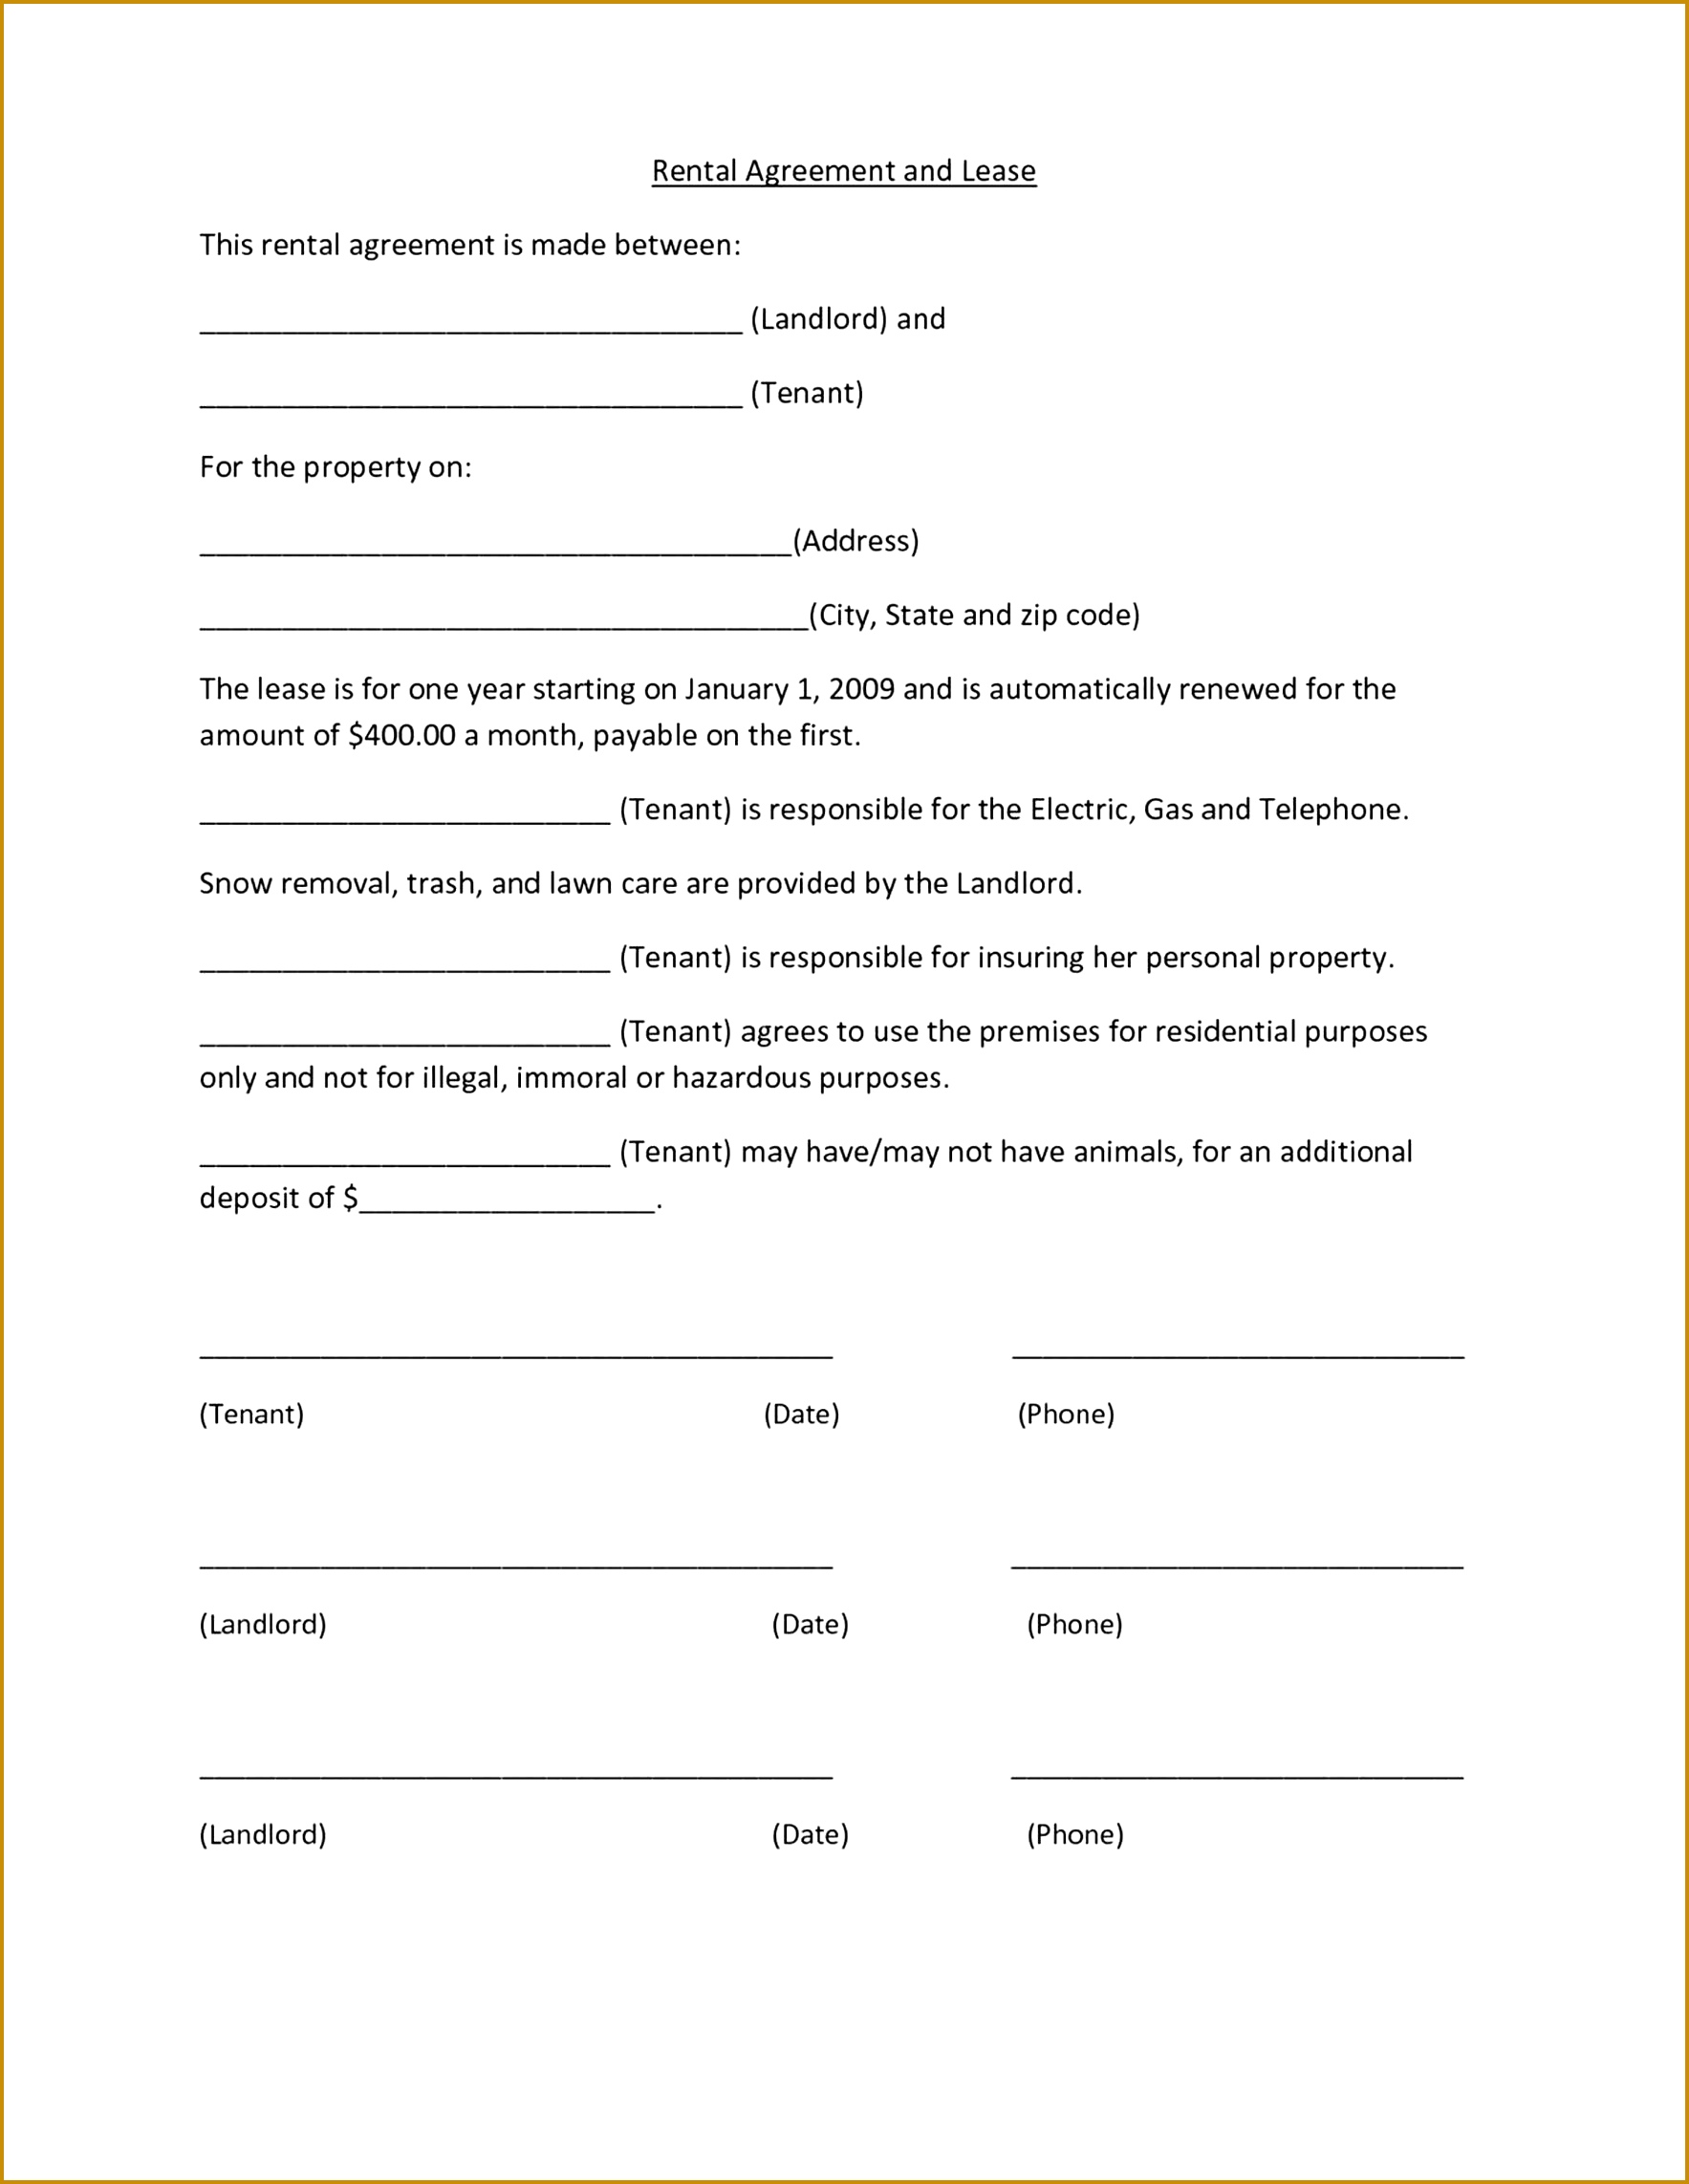 forms to print standard agreement free fice Rental Agreement Template rental agreements to print standard lease agreement 22851767